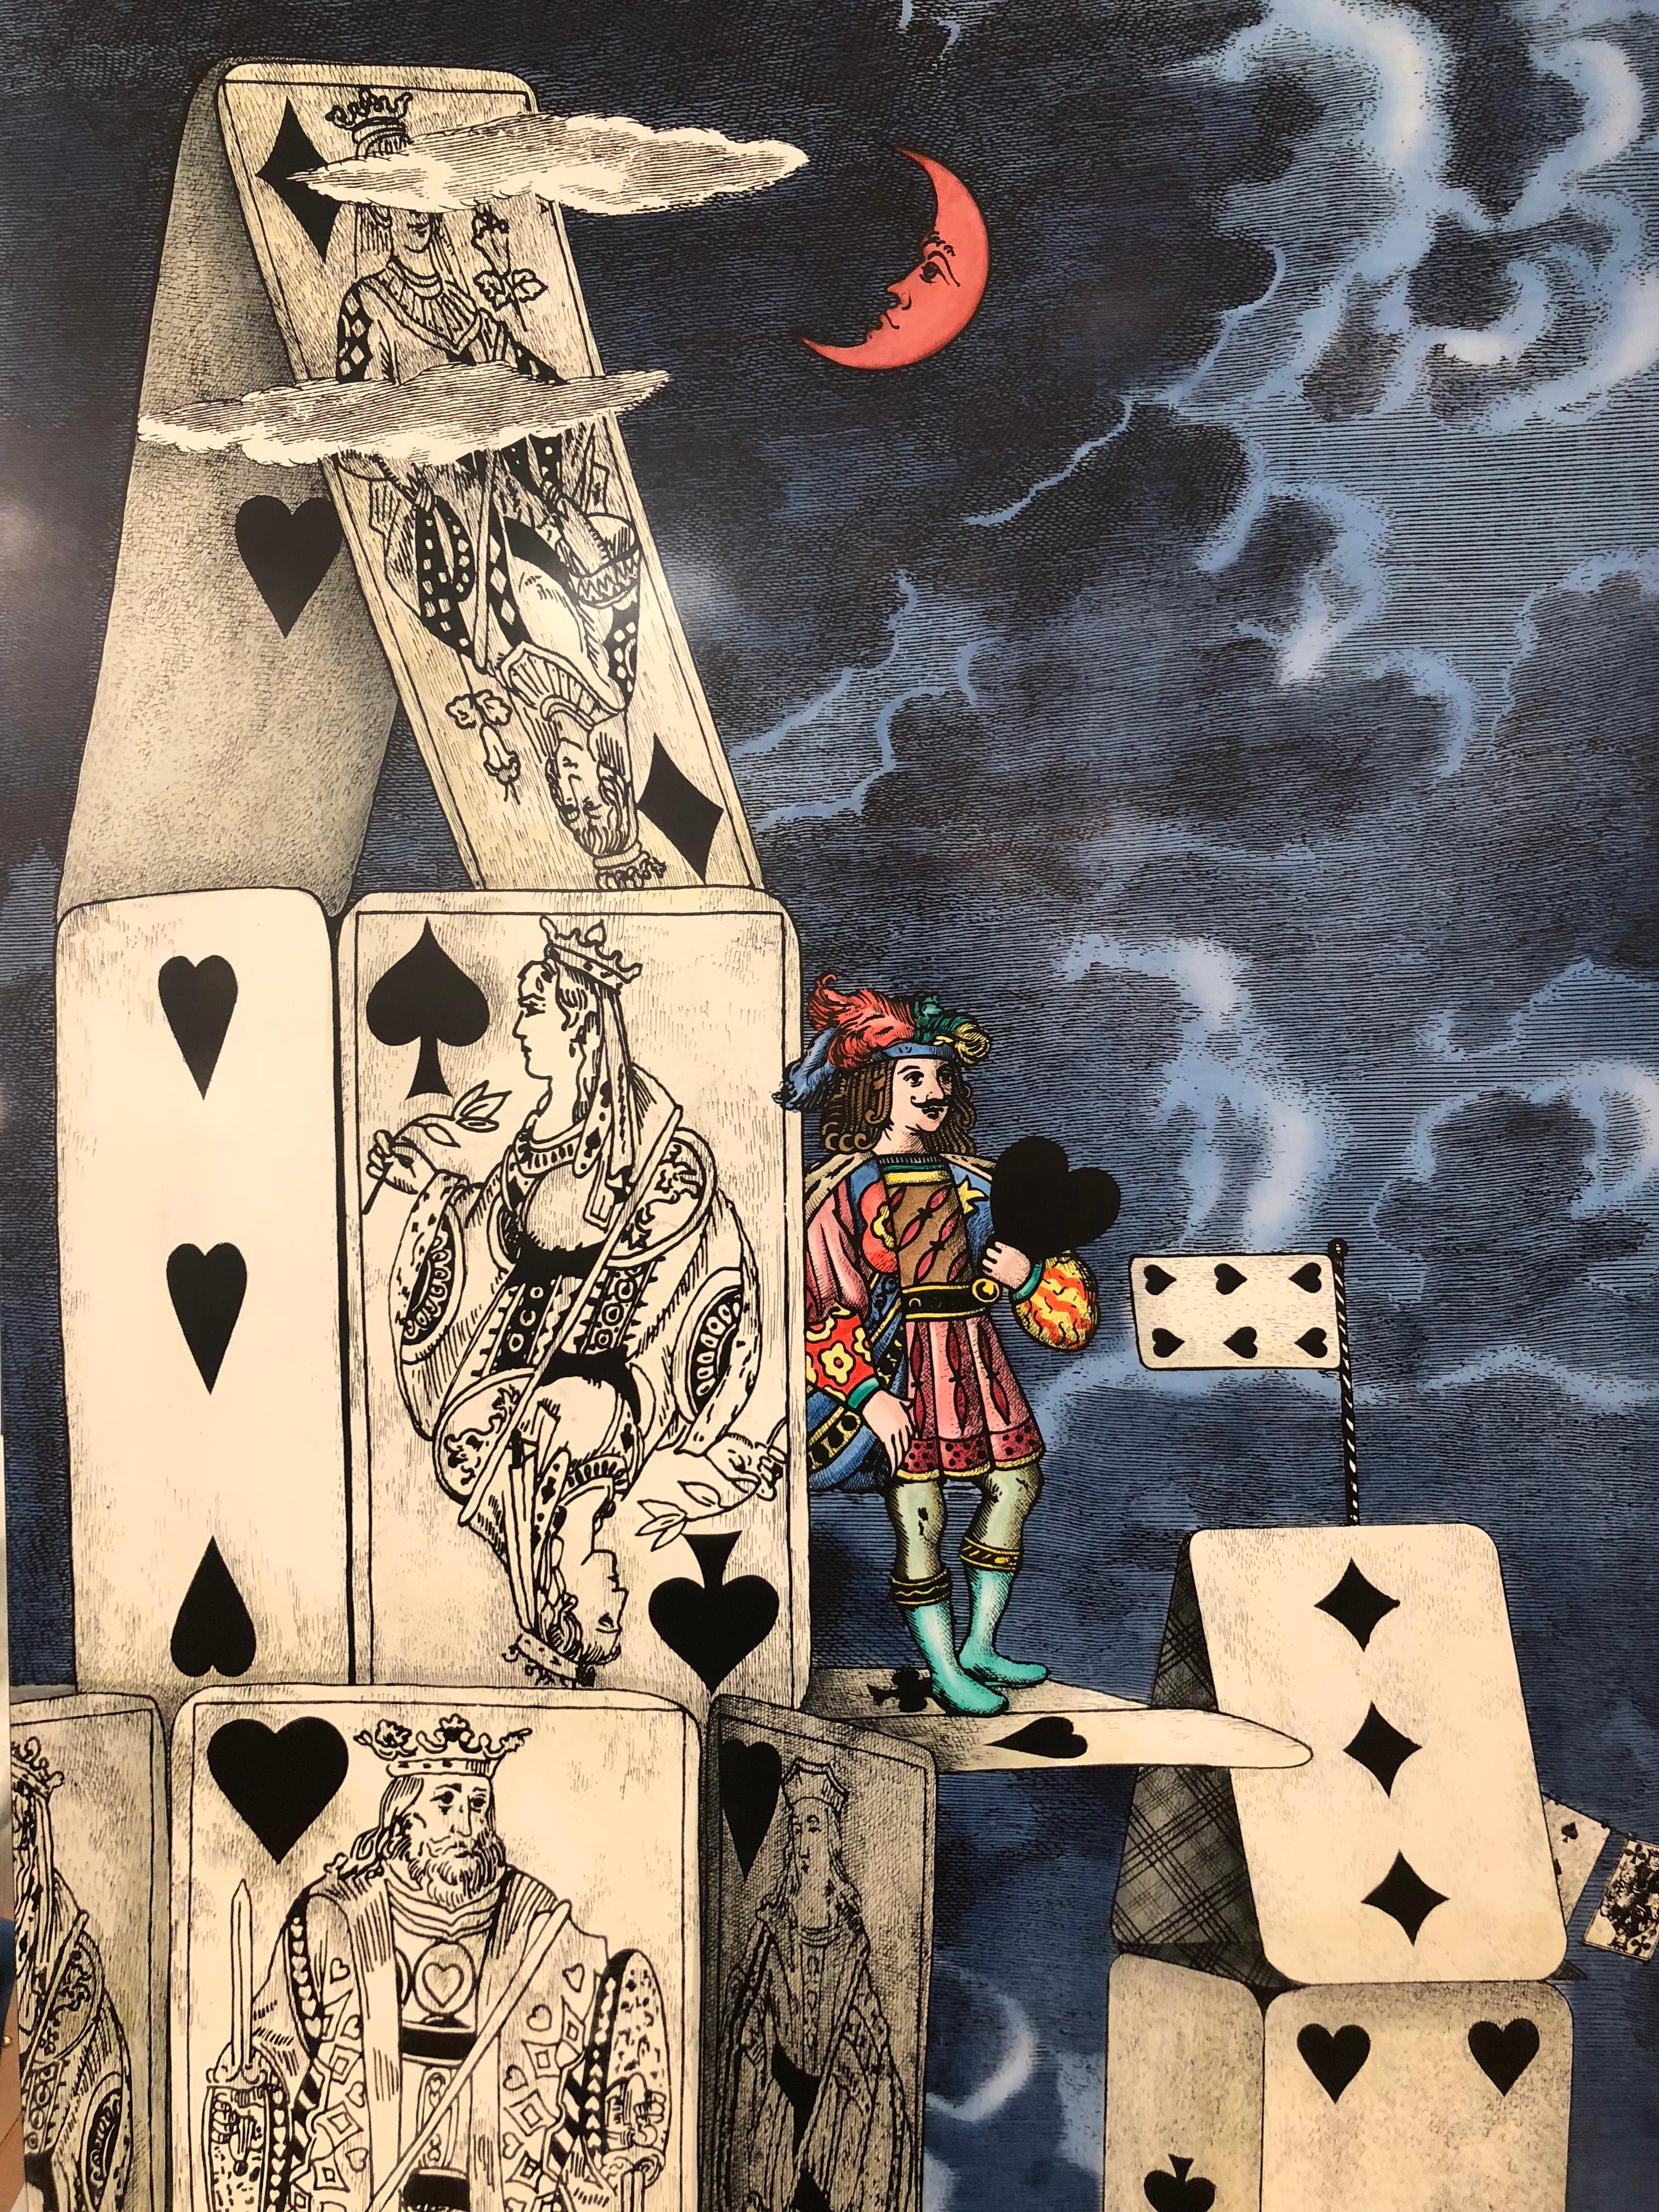 “Citta’ di Carte” (City of Cards) folding screen by Piero Fornasetti. Litographic transfer print on wood. Originally designed in 1950, this is one of four re-editions made in 2001. Marked and dated. Back is lacquered black.

Condition: Excellent,